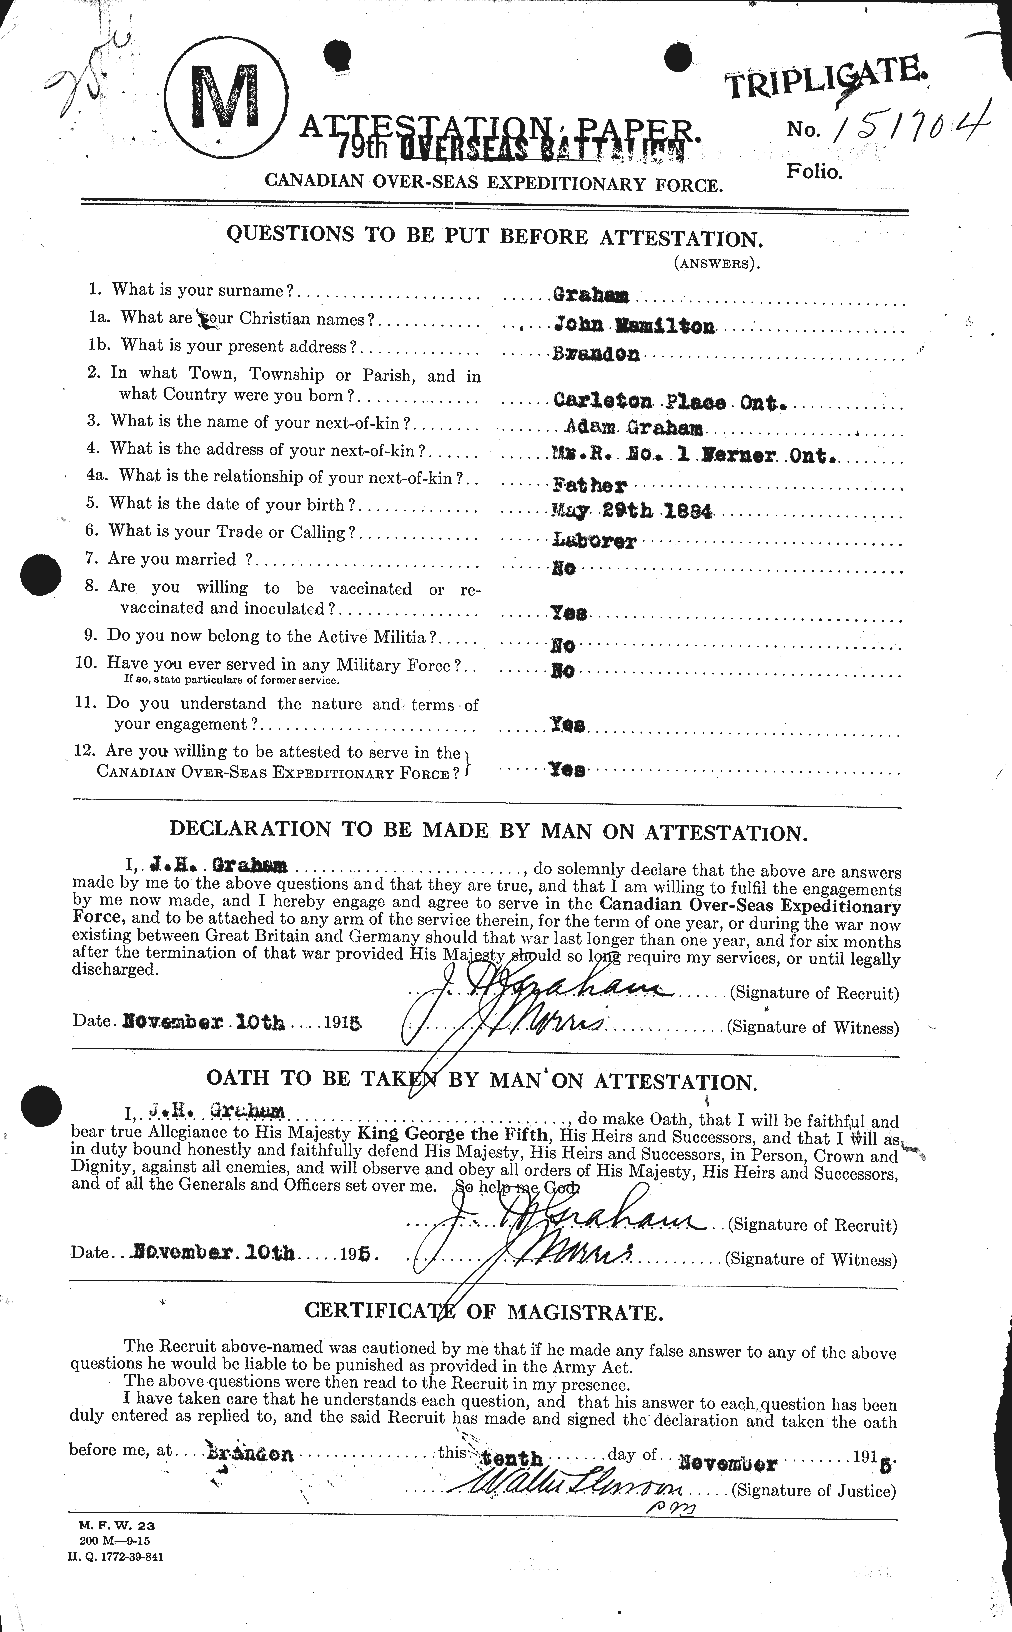 Personnel Records of the First World War - CEF 359177a